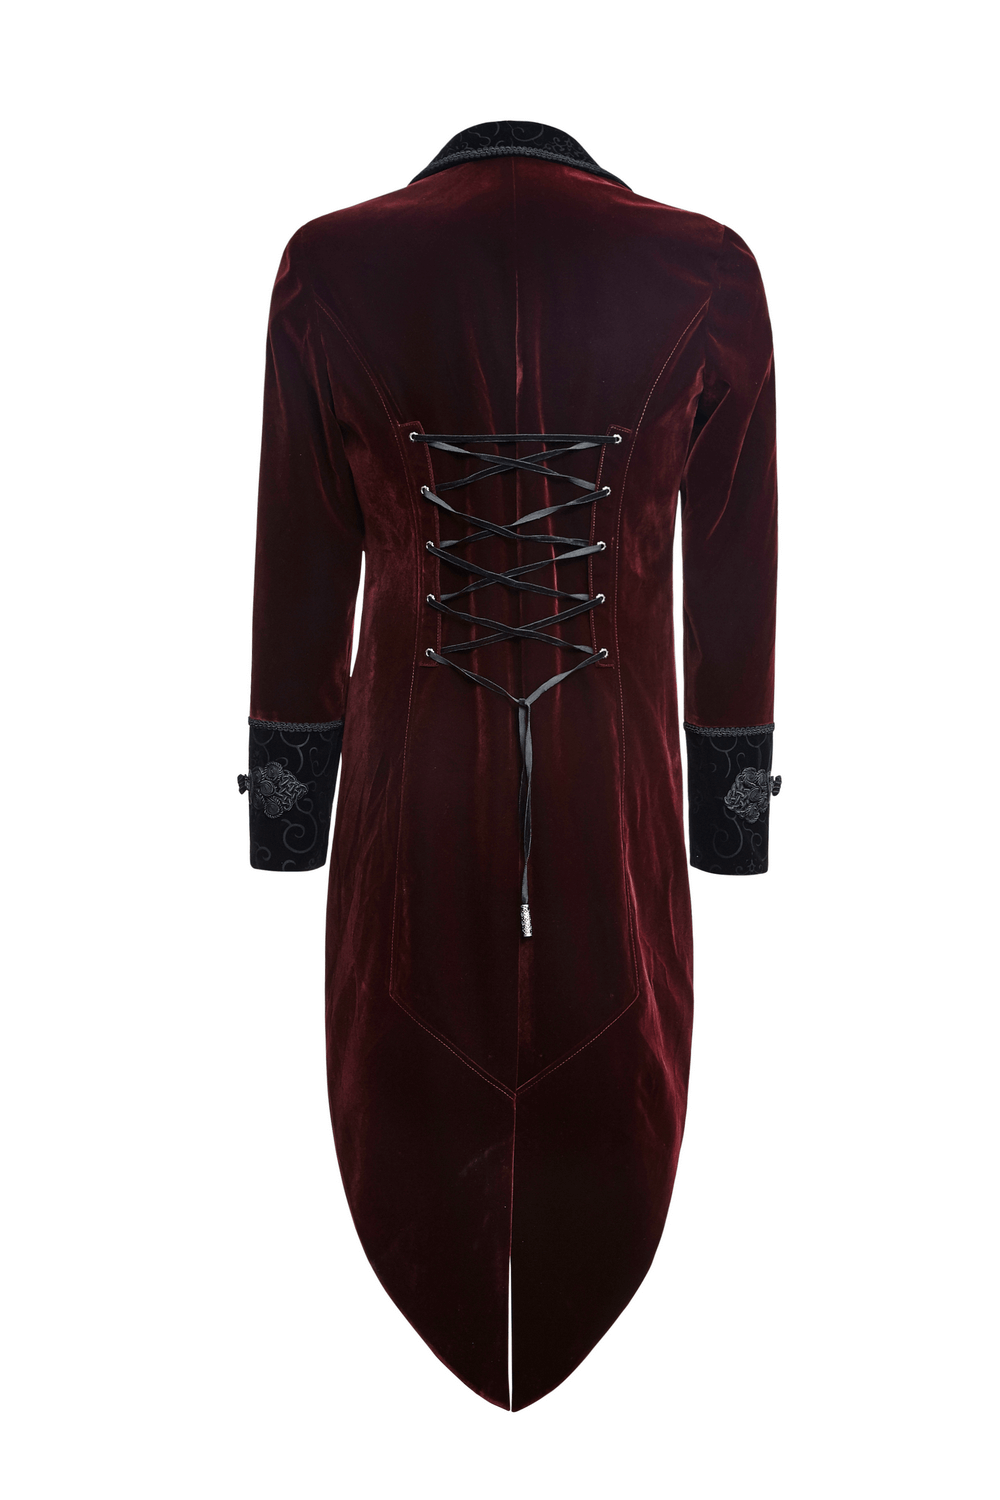 Wine Red Gothic Jacket with Classical Tailcoat Design - HARD'N'HEAVY